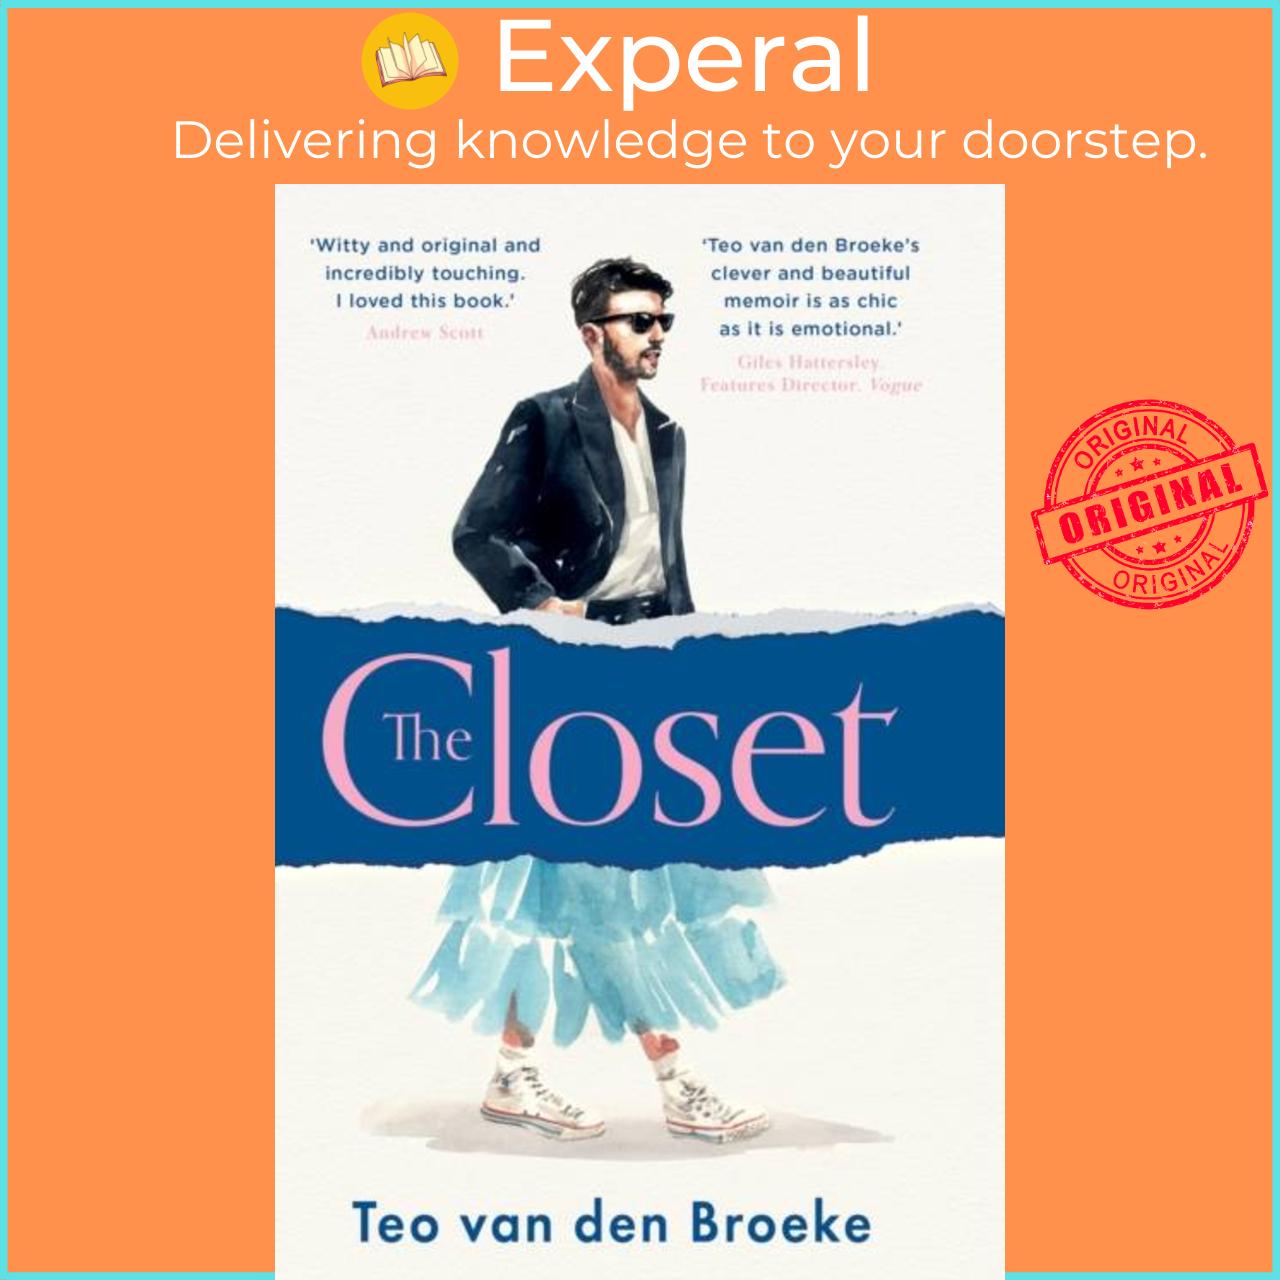 Sách - The Closet - A Coming-of-Age Story of Love, Awakenings and the Clot by Teo van den Broeke (UK edition, hardcover)